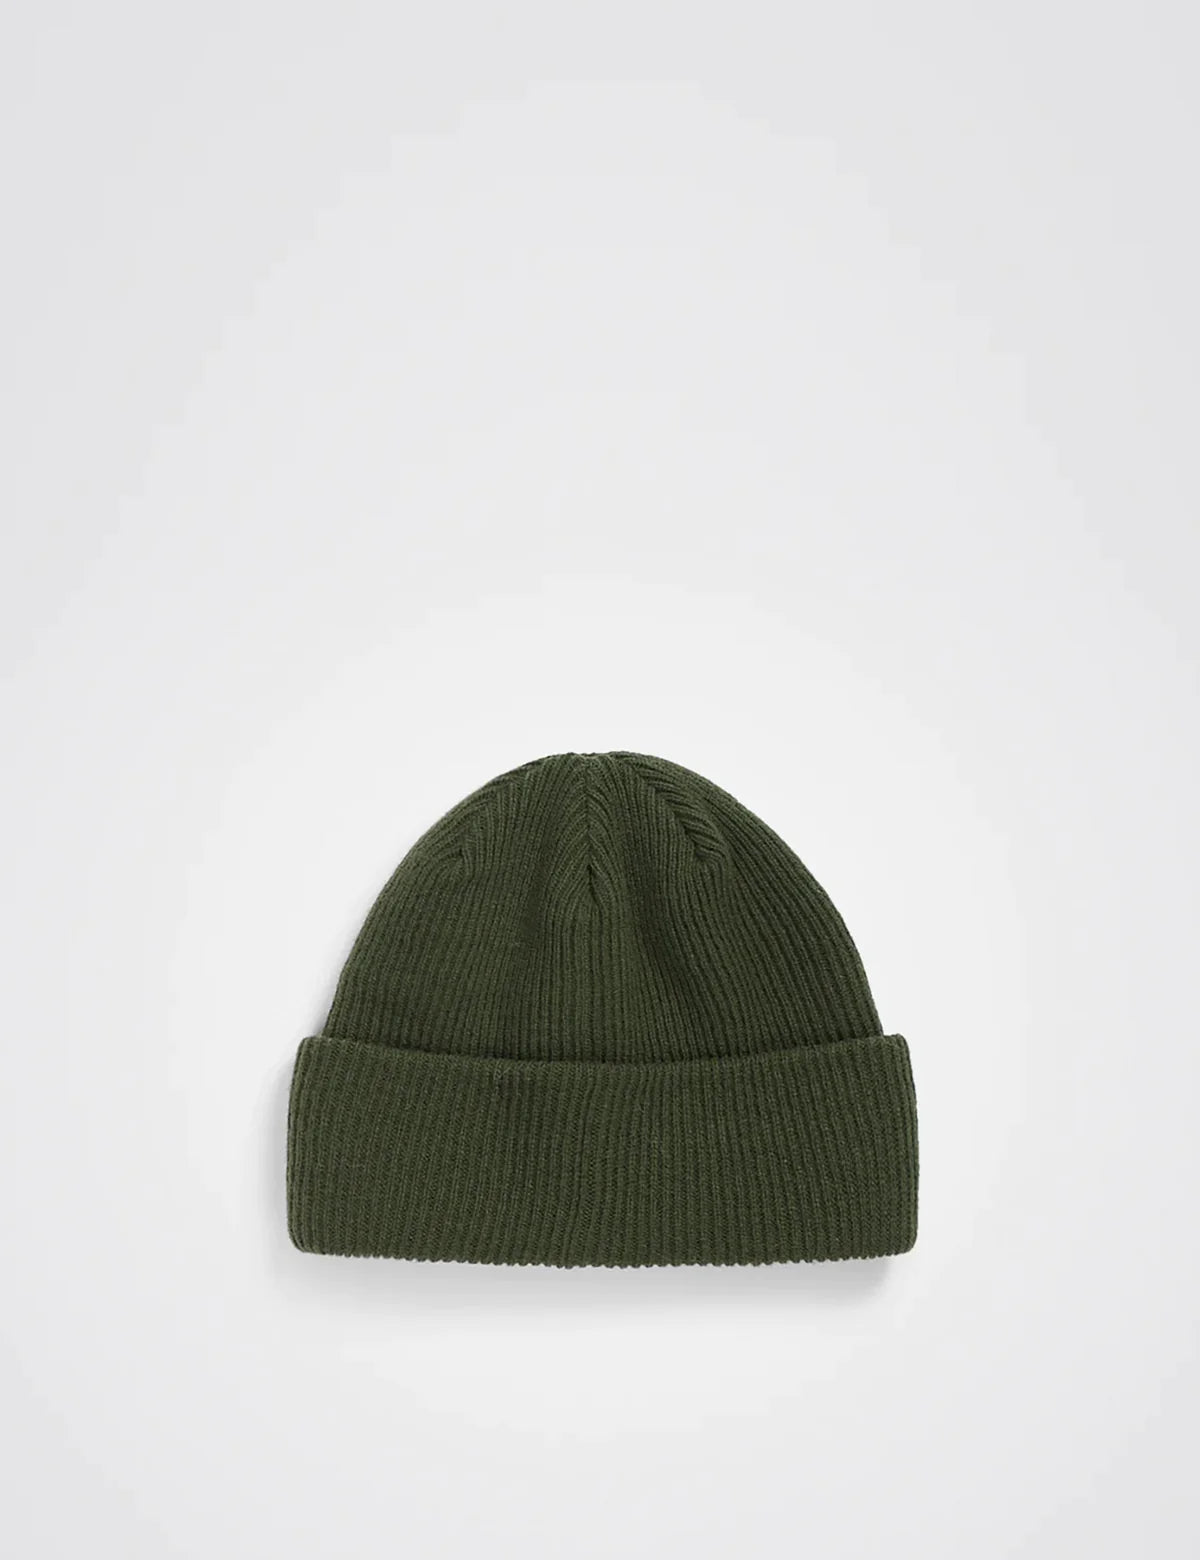 NORSE LAMBSWOOL BEANIE - ARMY GREEN